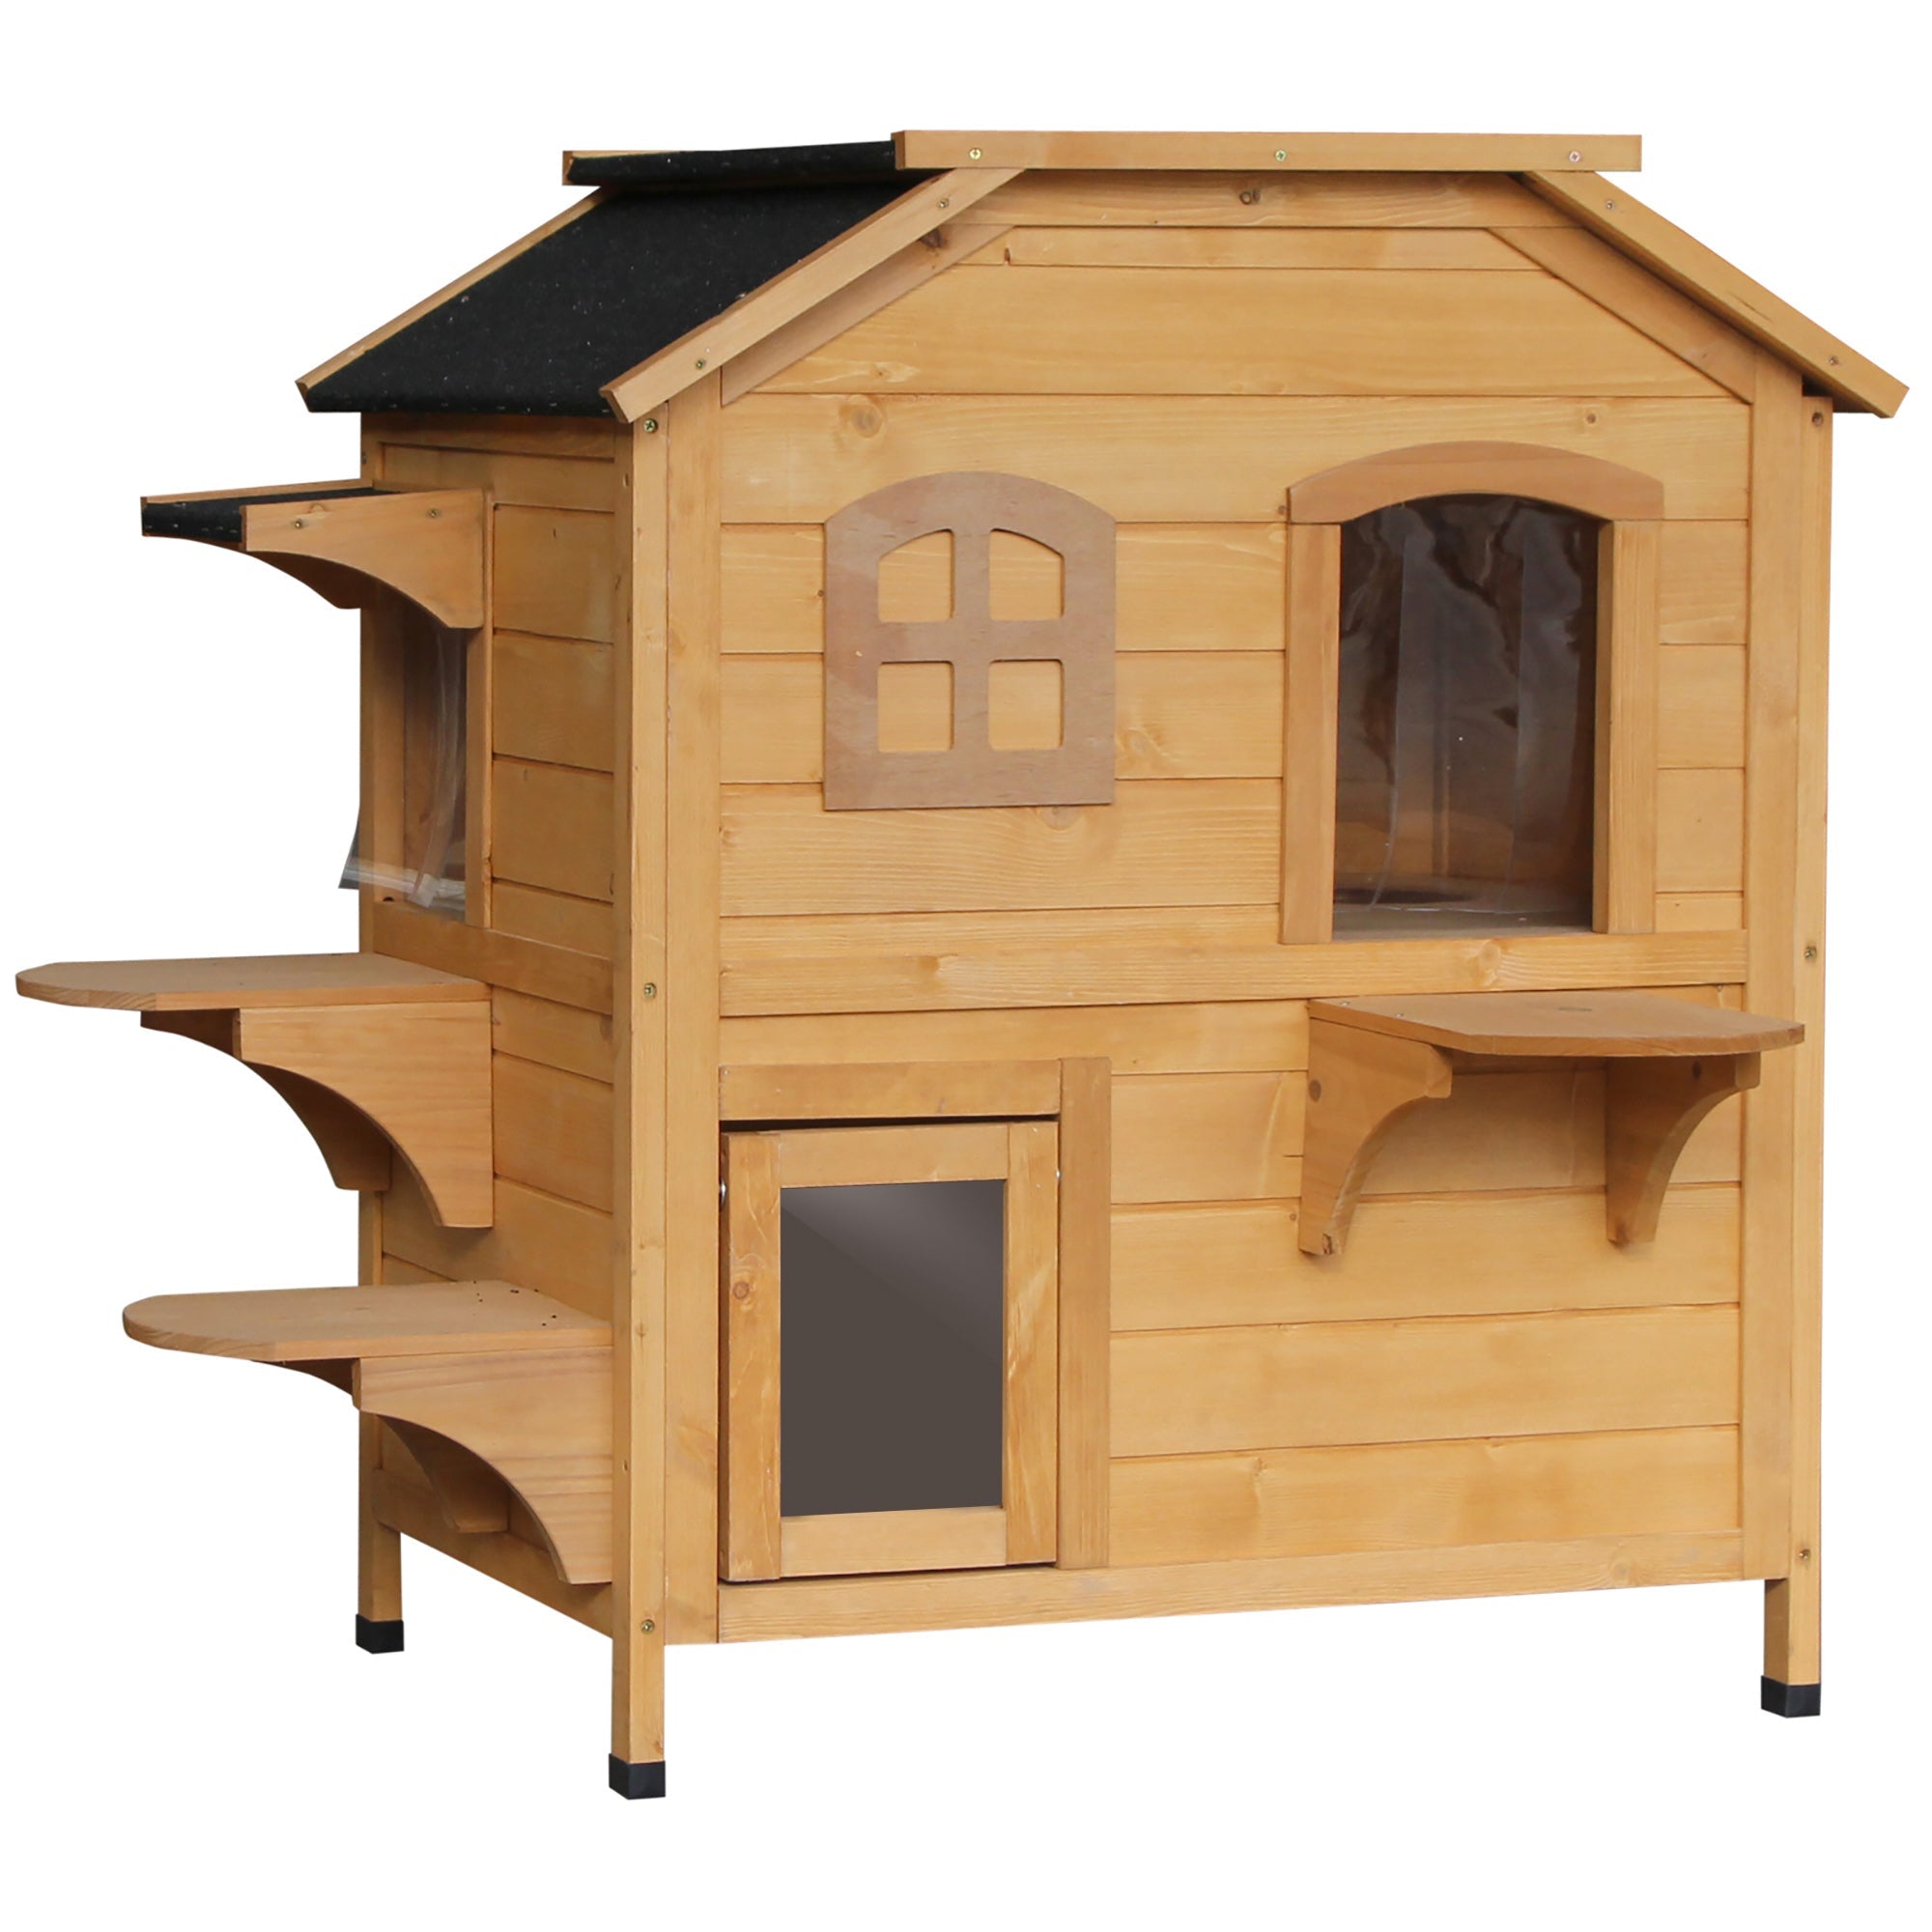 Dual-Level Wooden Cat House, Outdoor-Ready with Asphalt Roof, PawHut, Natural